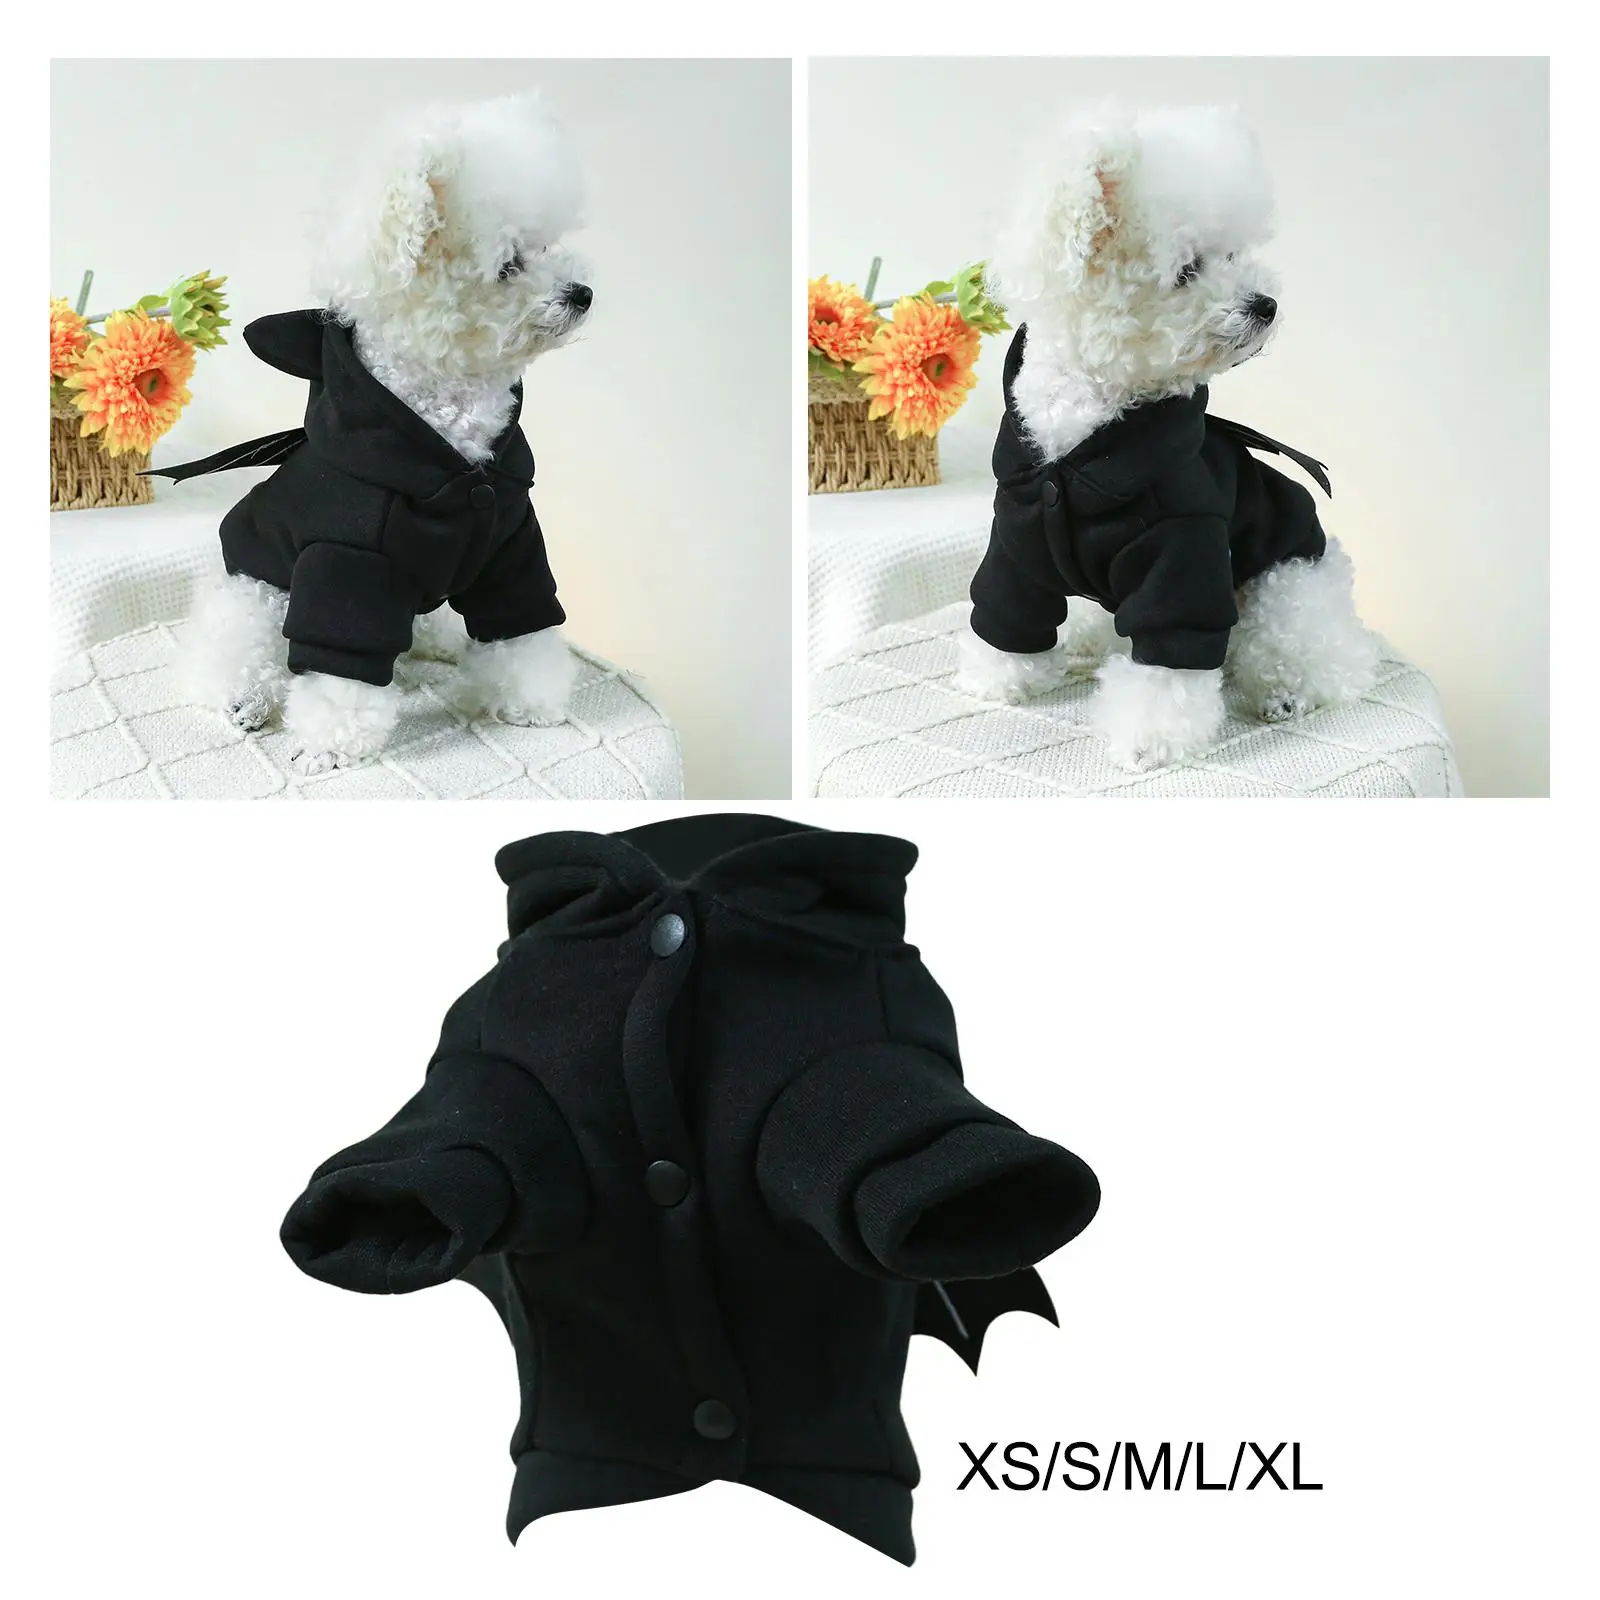 Pet Costume Halloween Dog Costume Cosplay Puppy Dress up Supplies Apparel Dog Clothes for New Year Halloween Party Holiday